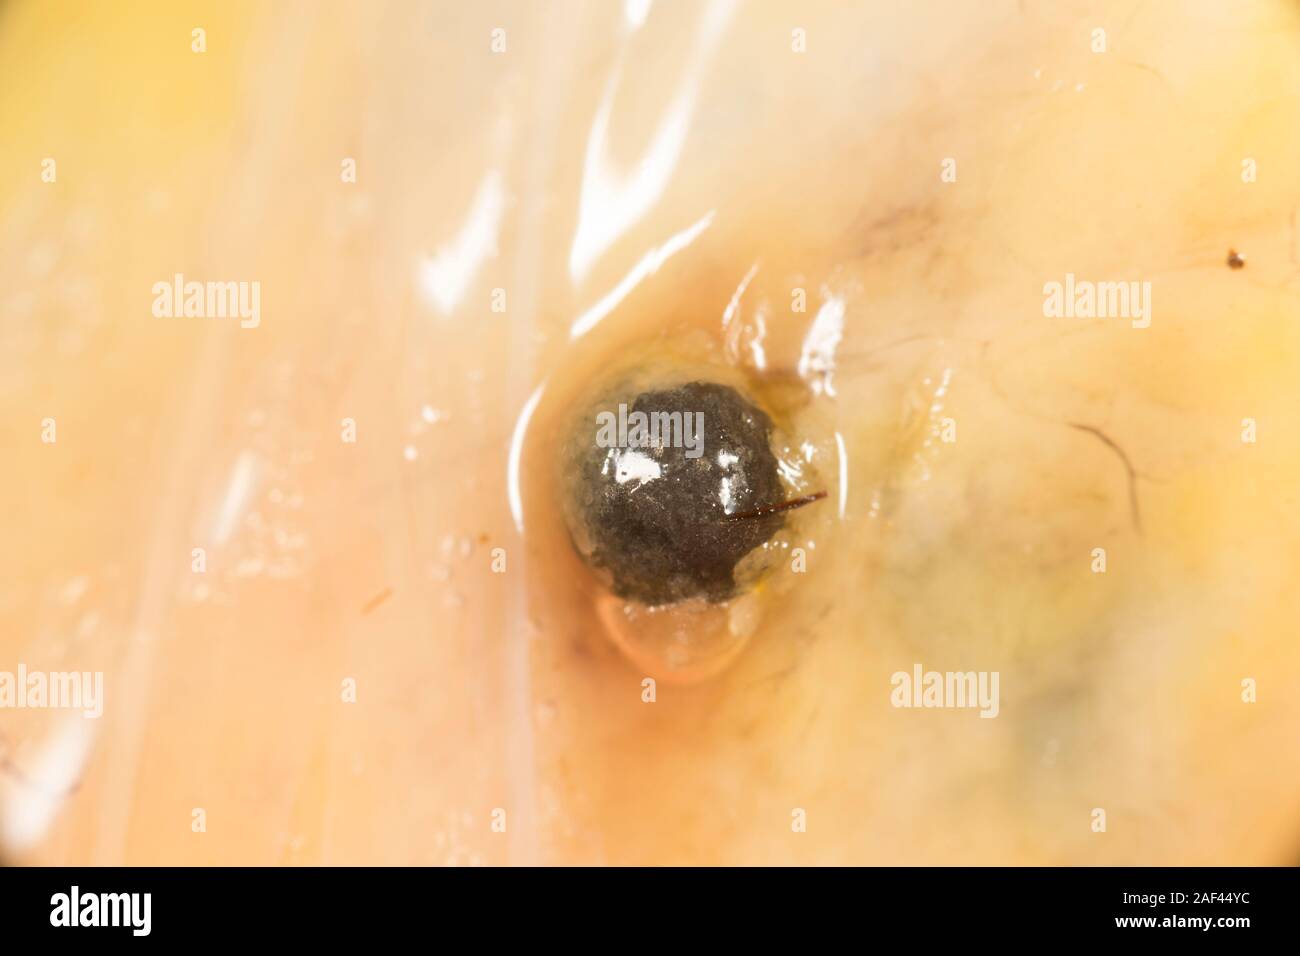 A lead shotgun pellet in the fat of a pheasant being prepared for cooking that was shot on a driven pheasant shoot. England UK GB Stock Photo